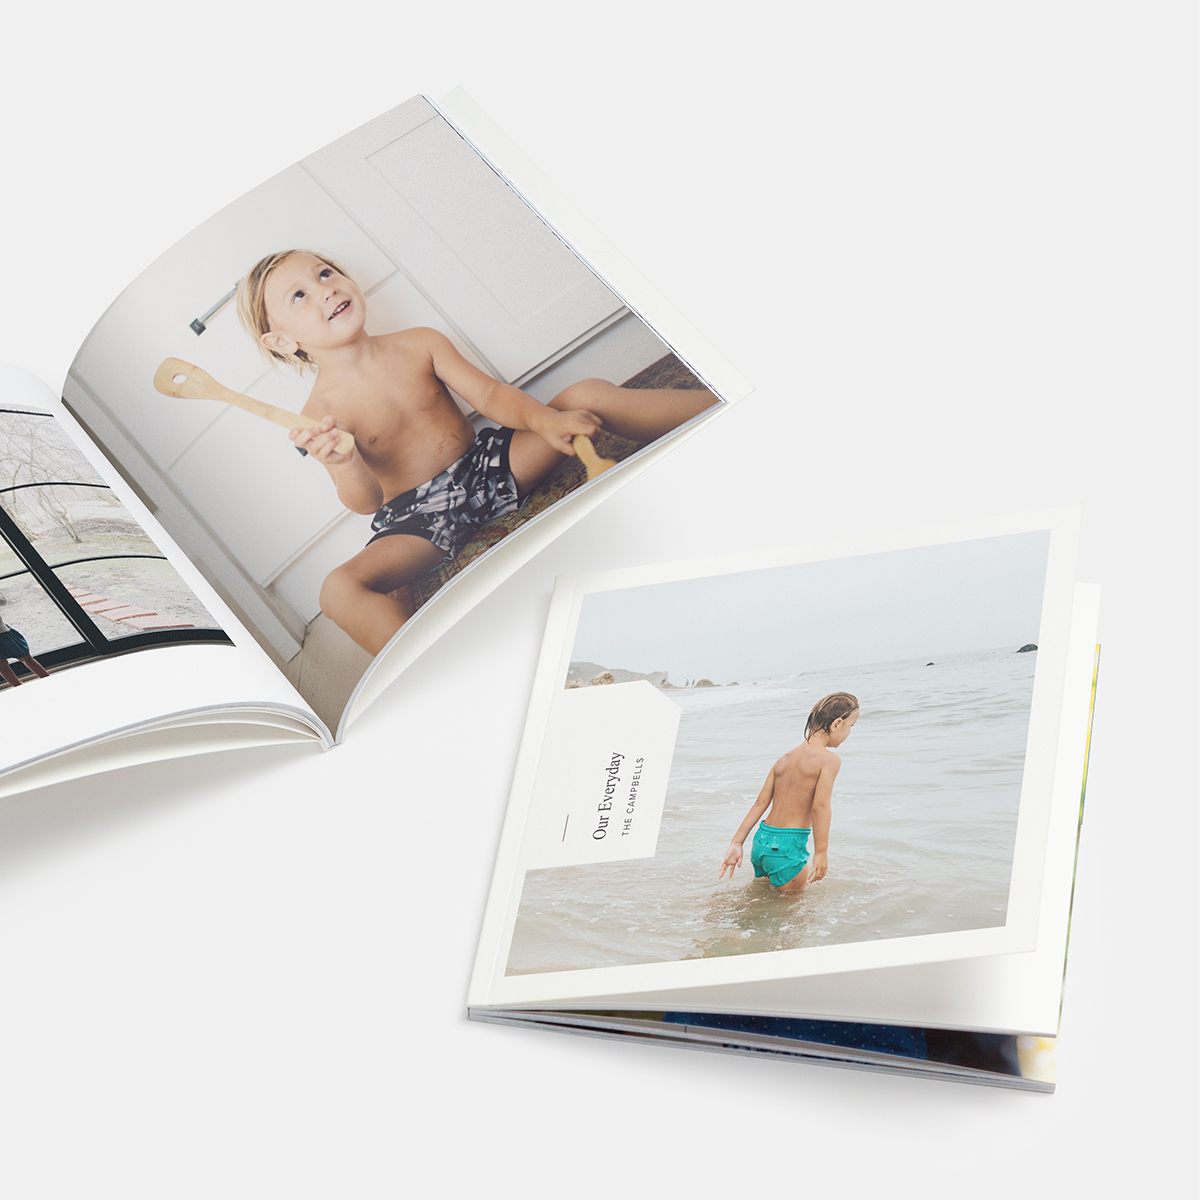 Softcover Photo Book with little boy on cover printed using photos from cloud storage